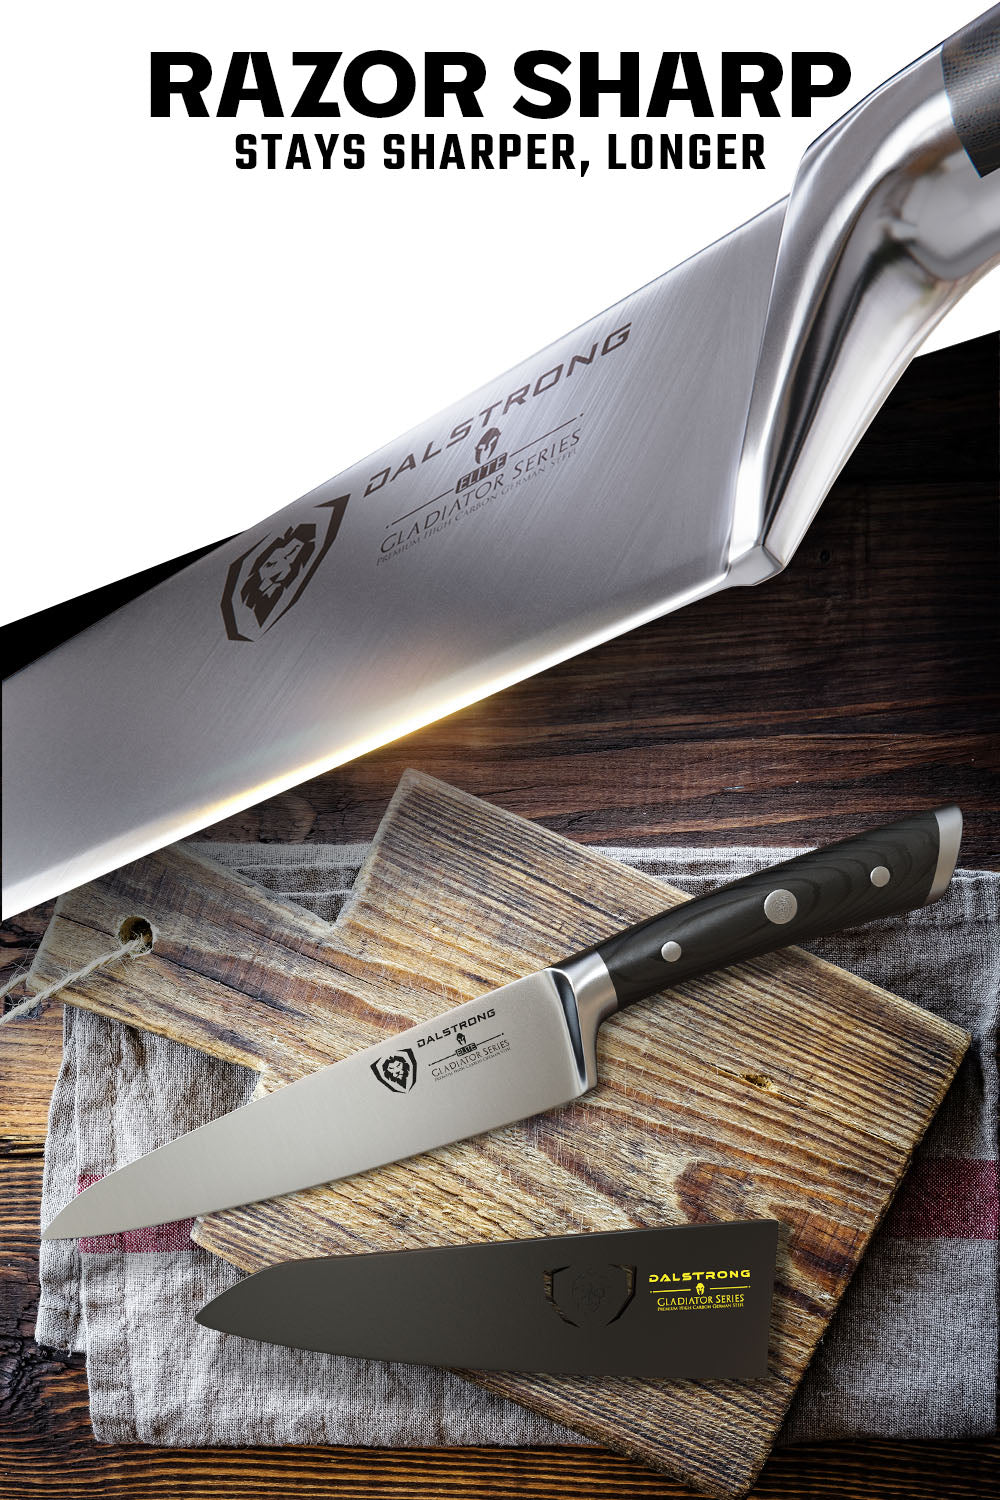 Dalstrong gladiator series 7 inch chef knife with black handle featuring it's razor sharp blade.